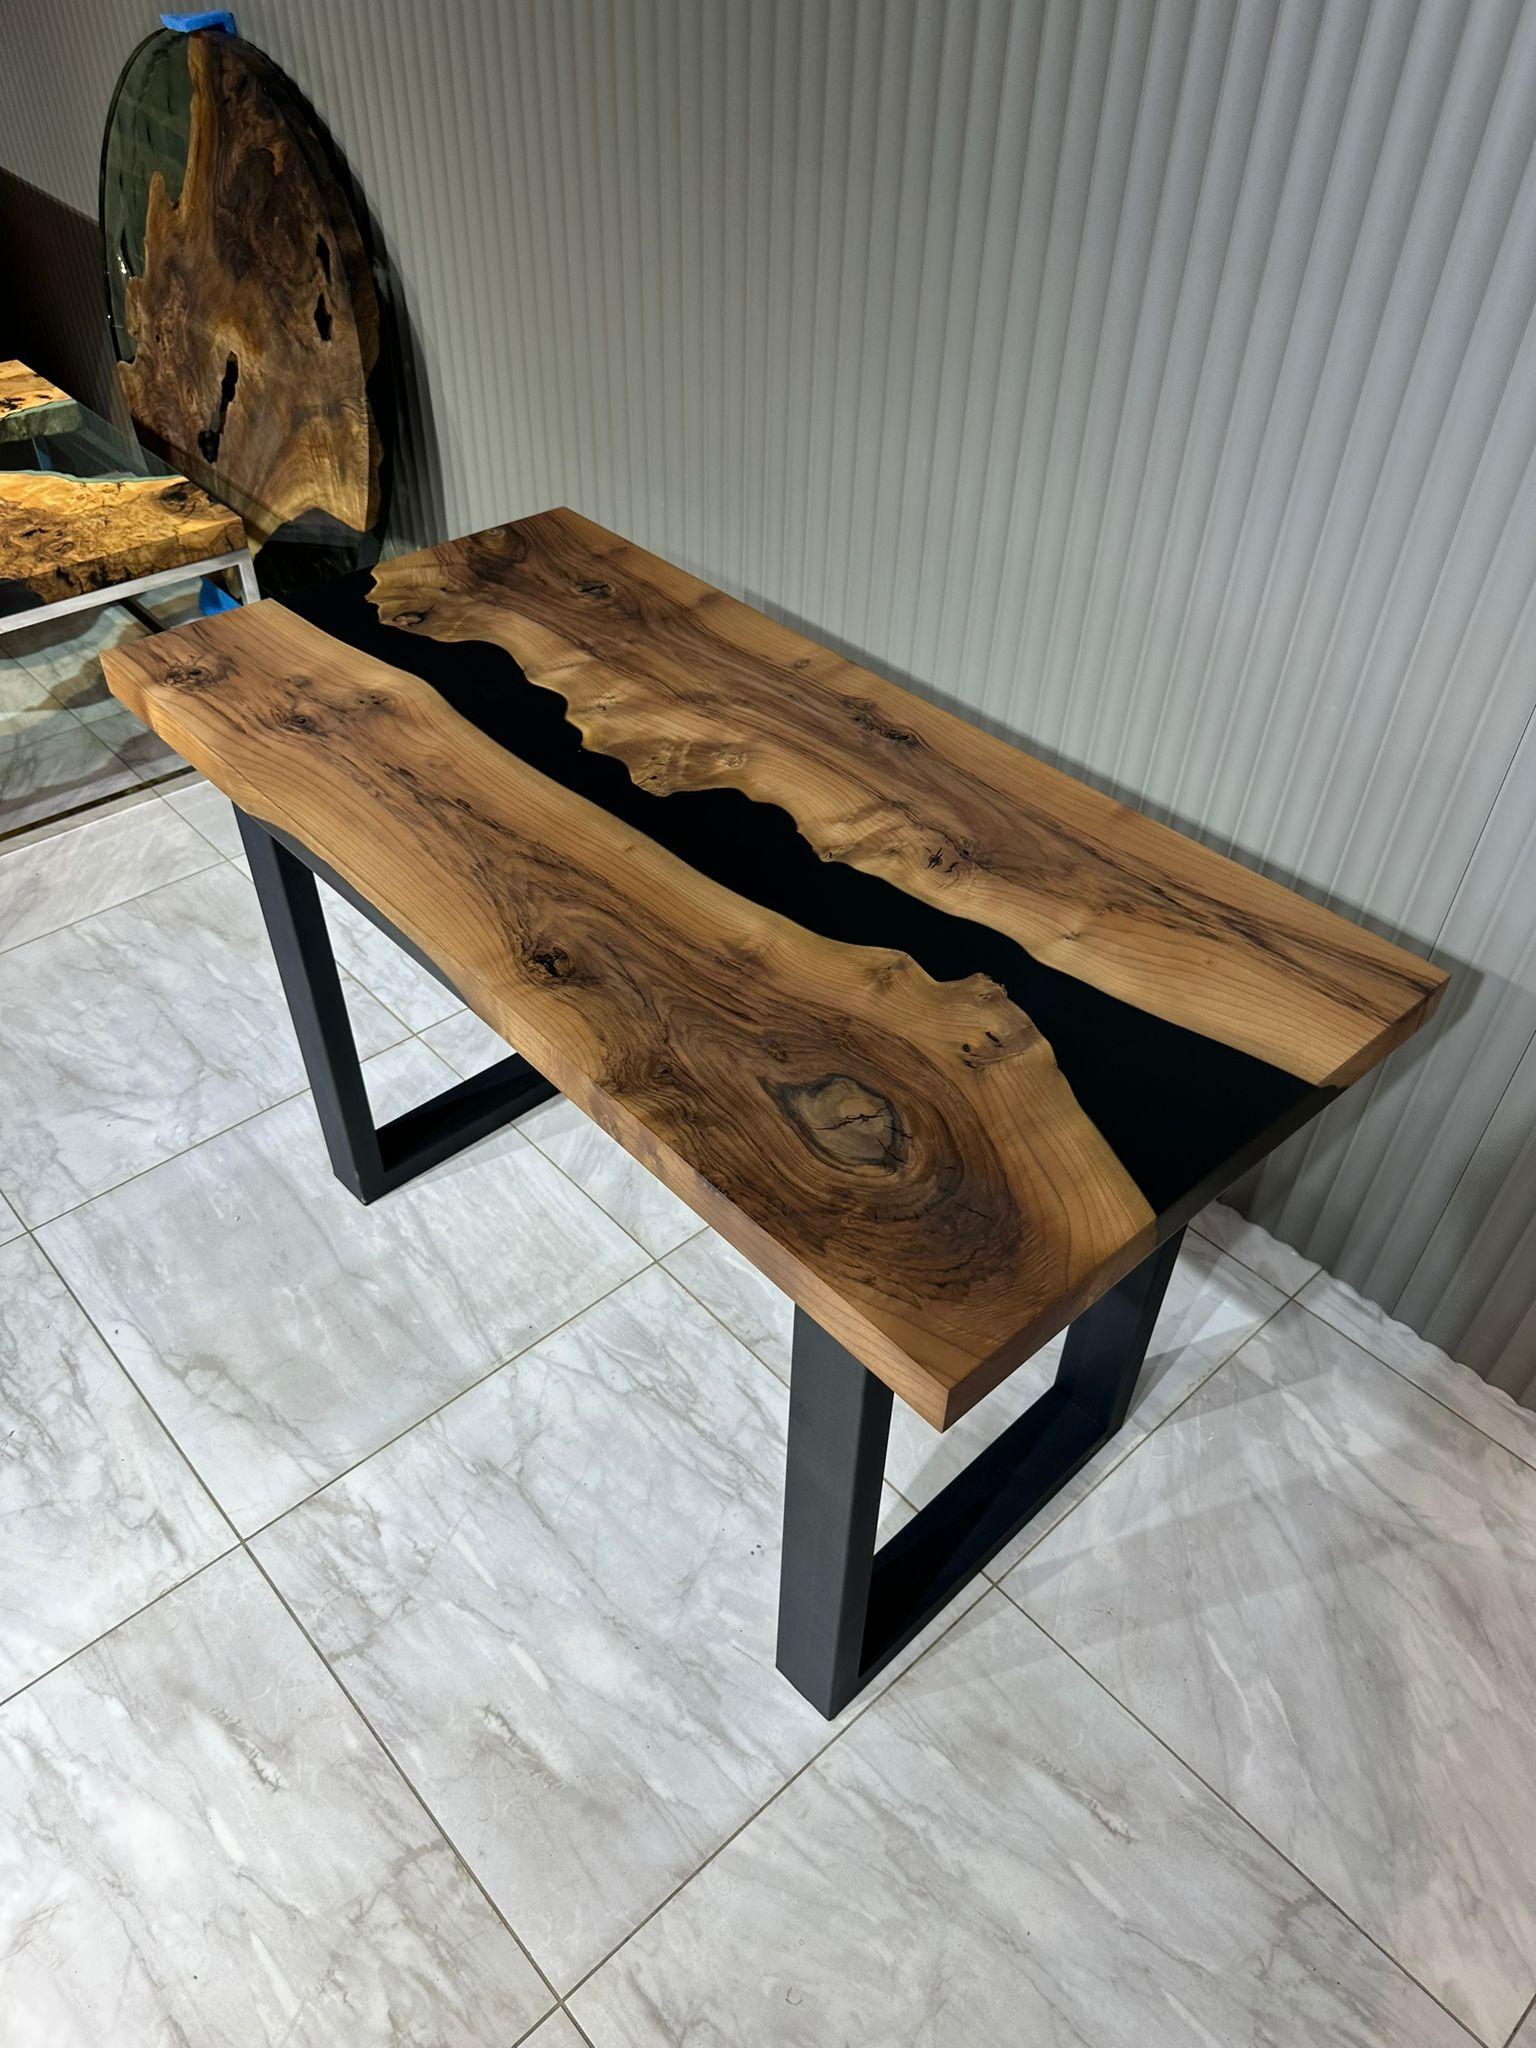 Walnut Epoxy Resin Dining Table

This table is made of walnut wood & black epoxy.

Custom sizes, colours and finishes are available!